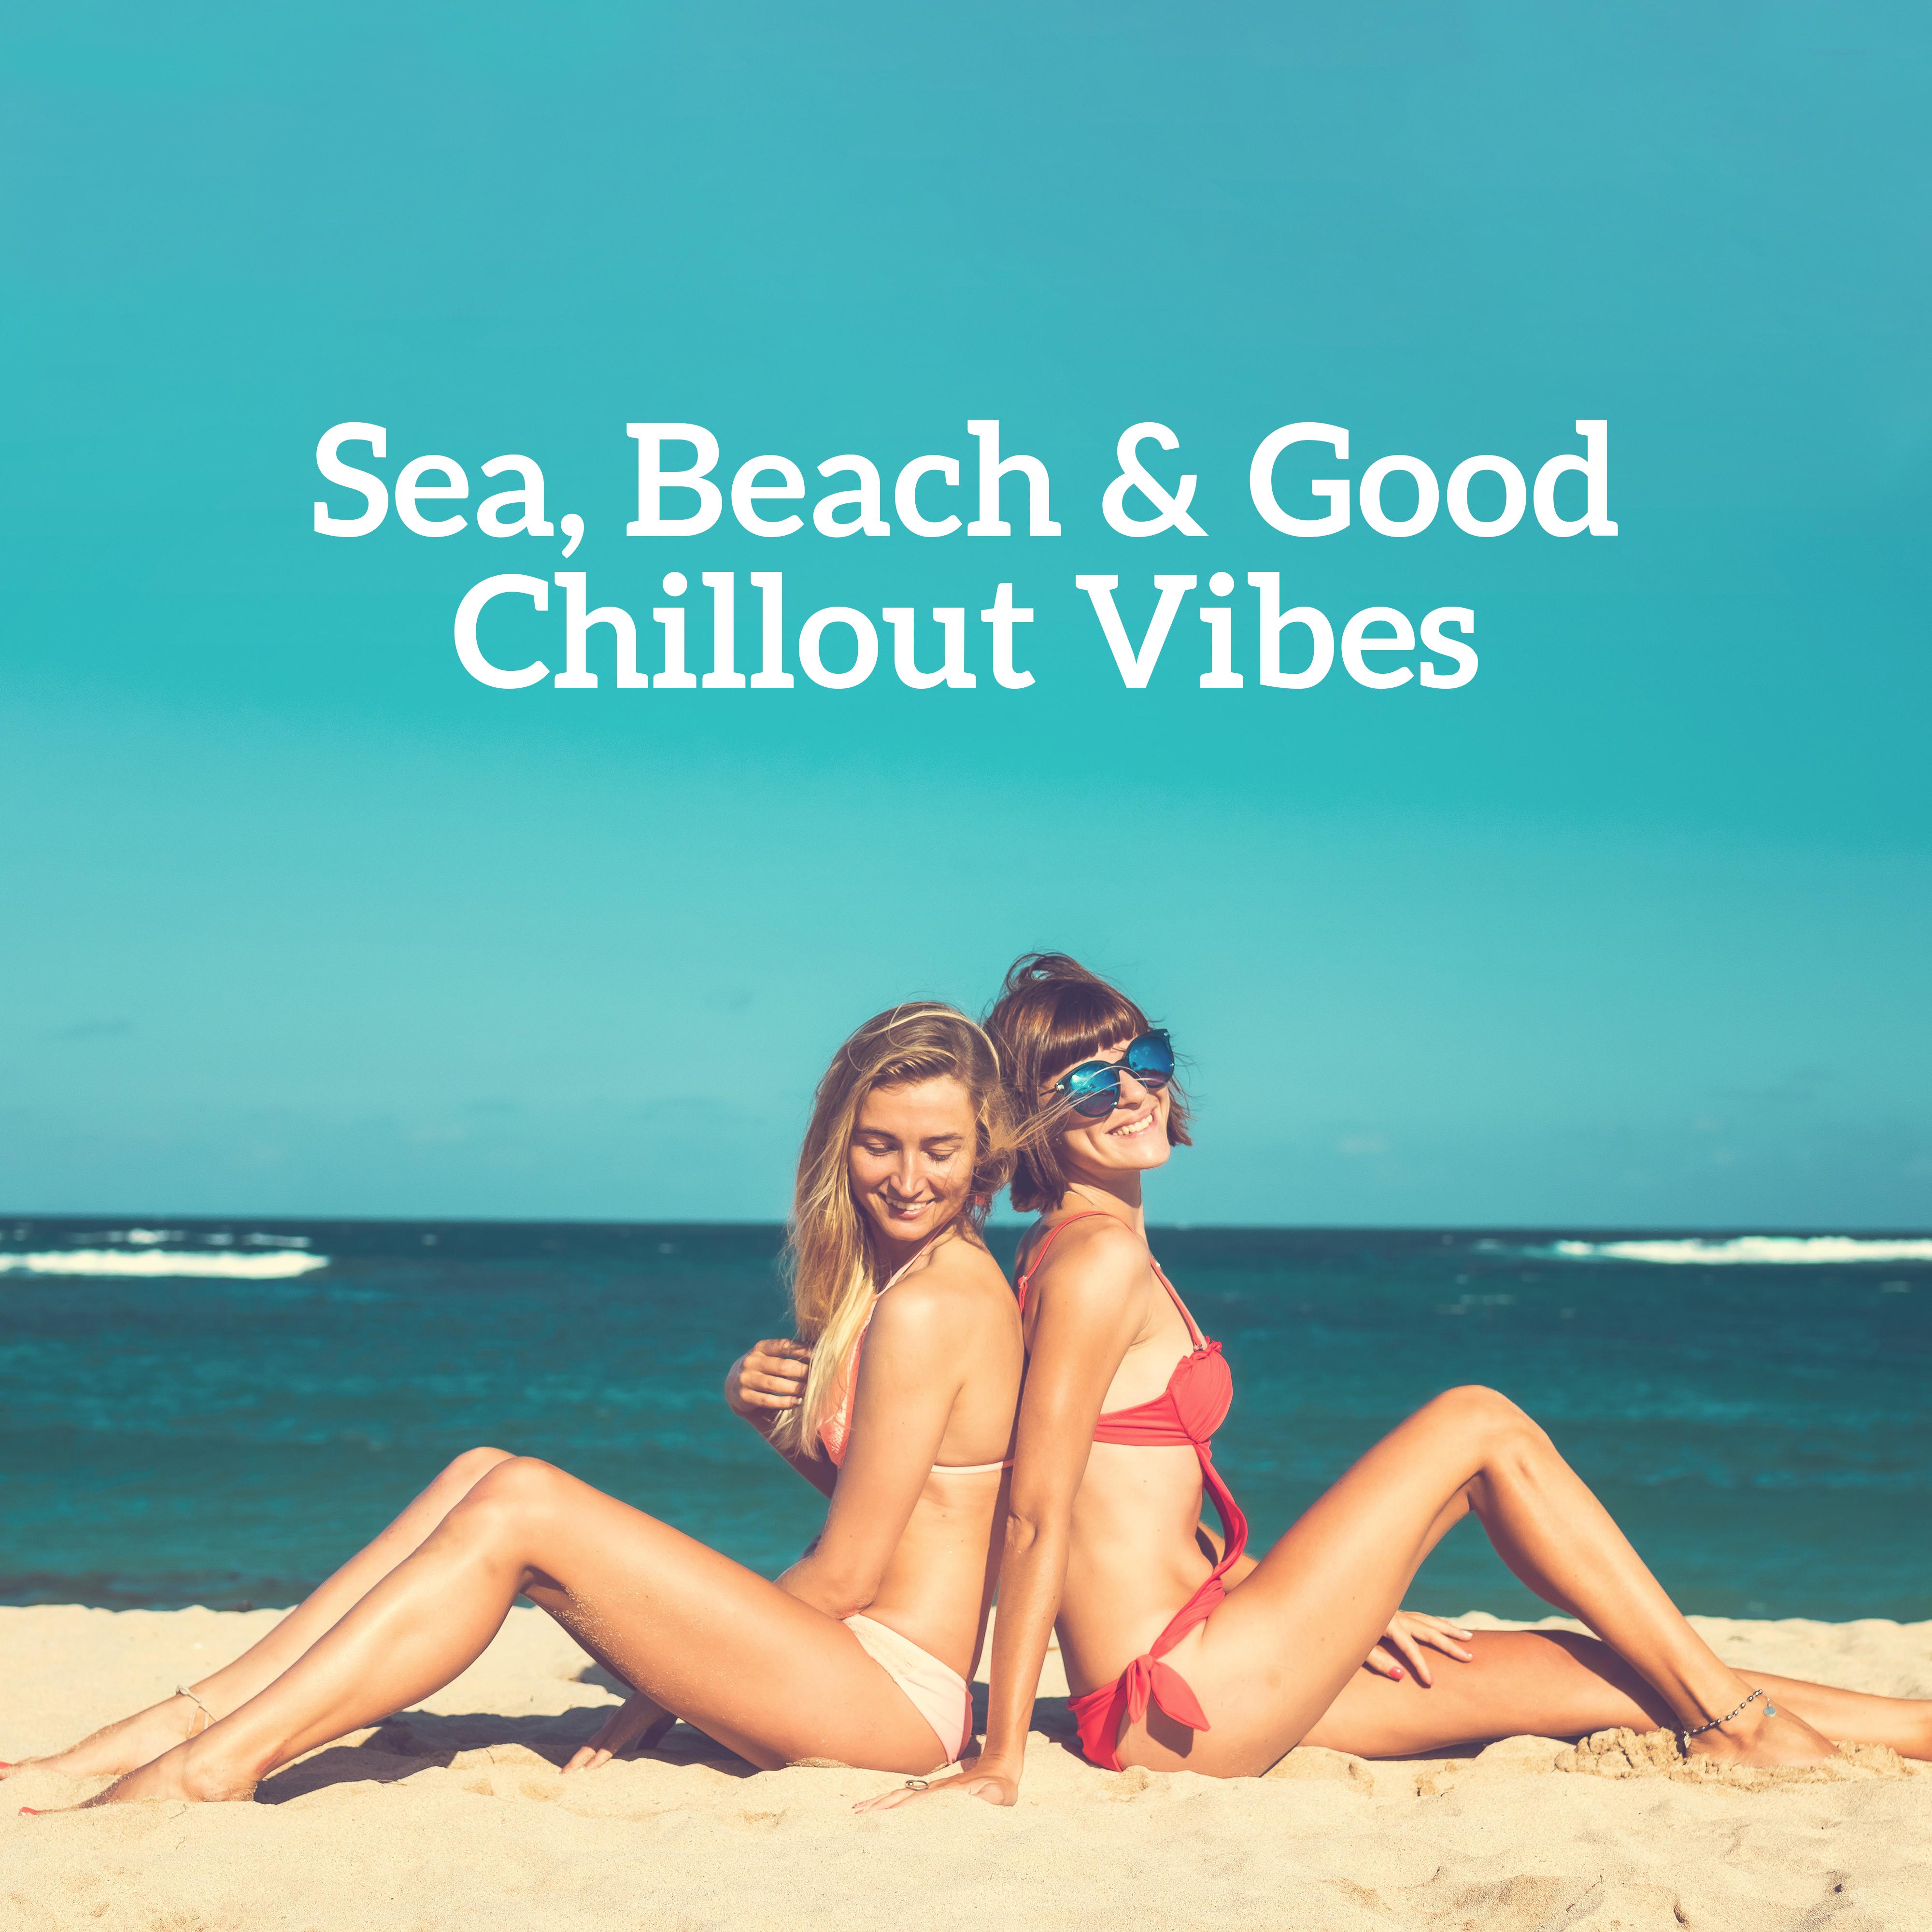 Sea, Beach & Good Chillout Vibes – 2019 Chill Out Hot Summer Rhythms, Music Perfect for Holiday Relaxataion, Tropical Vacation Celebration Songs